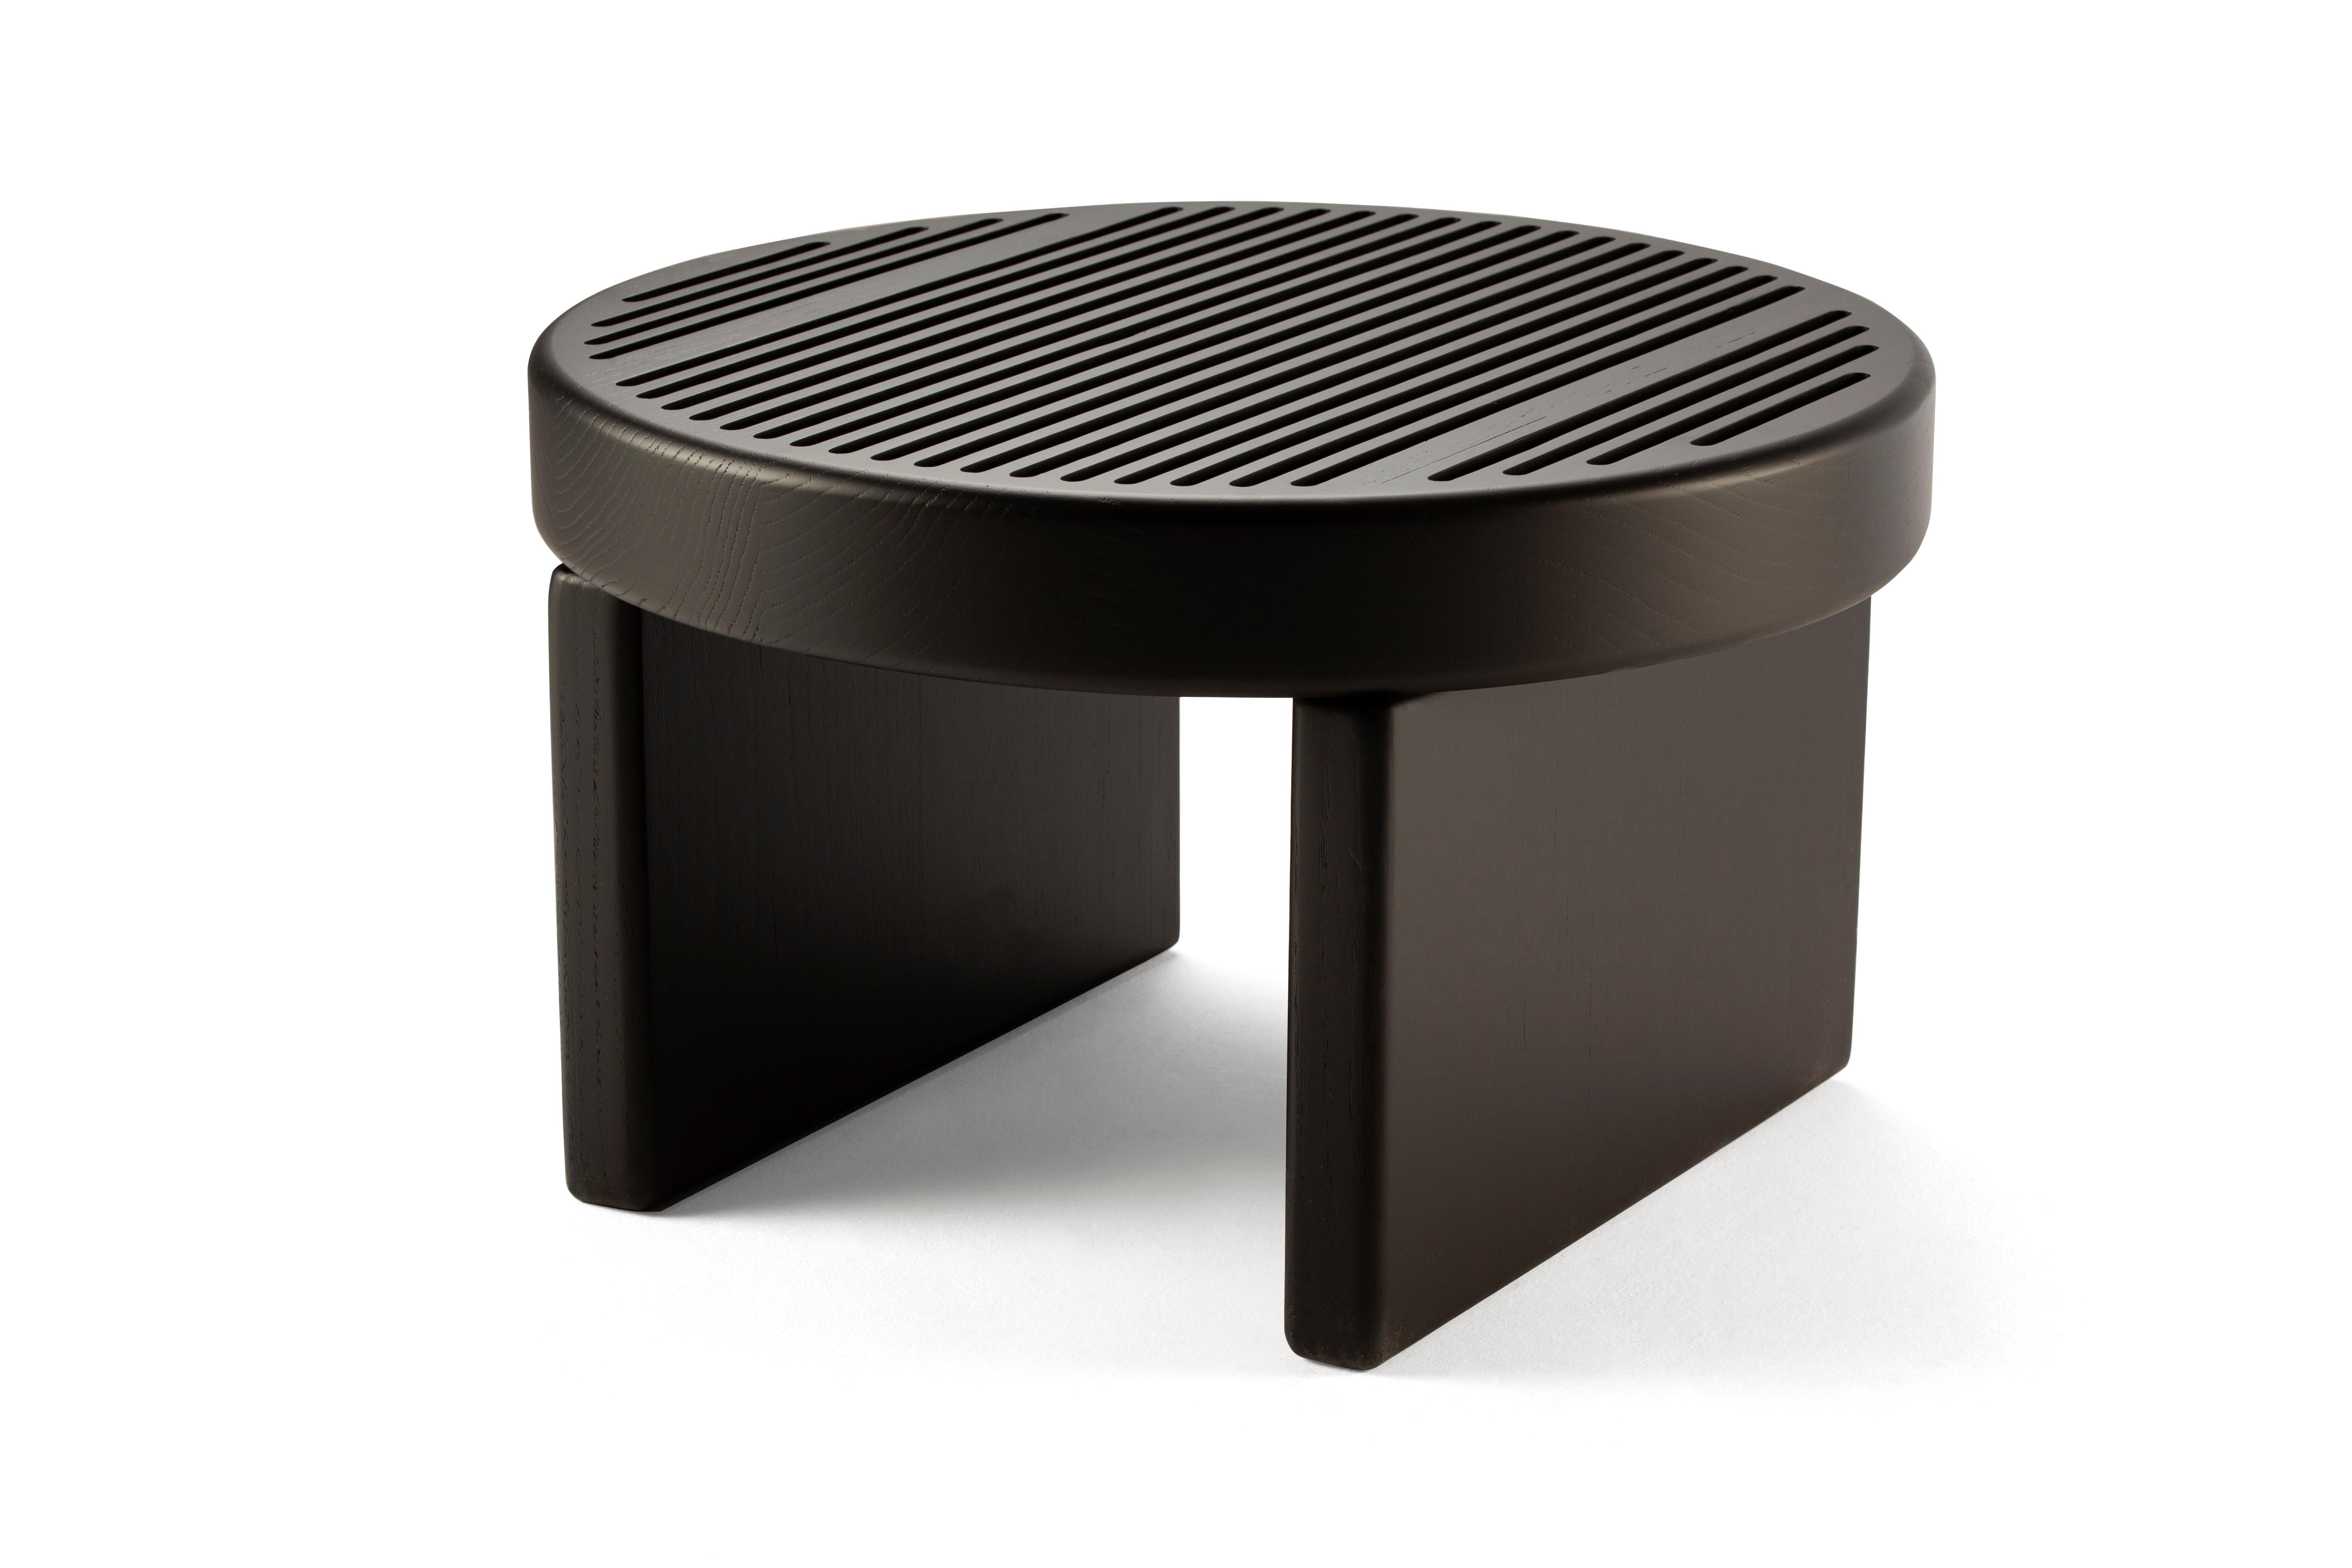 Contemporary Modern Rillo Big Table by Collector Studio

Rillo is a solid wood side table, softened by its straight lines sliced top. It has pure shapes and flowing surfaces.
It come in two heights, multiplying its possible uses, such as a